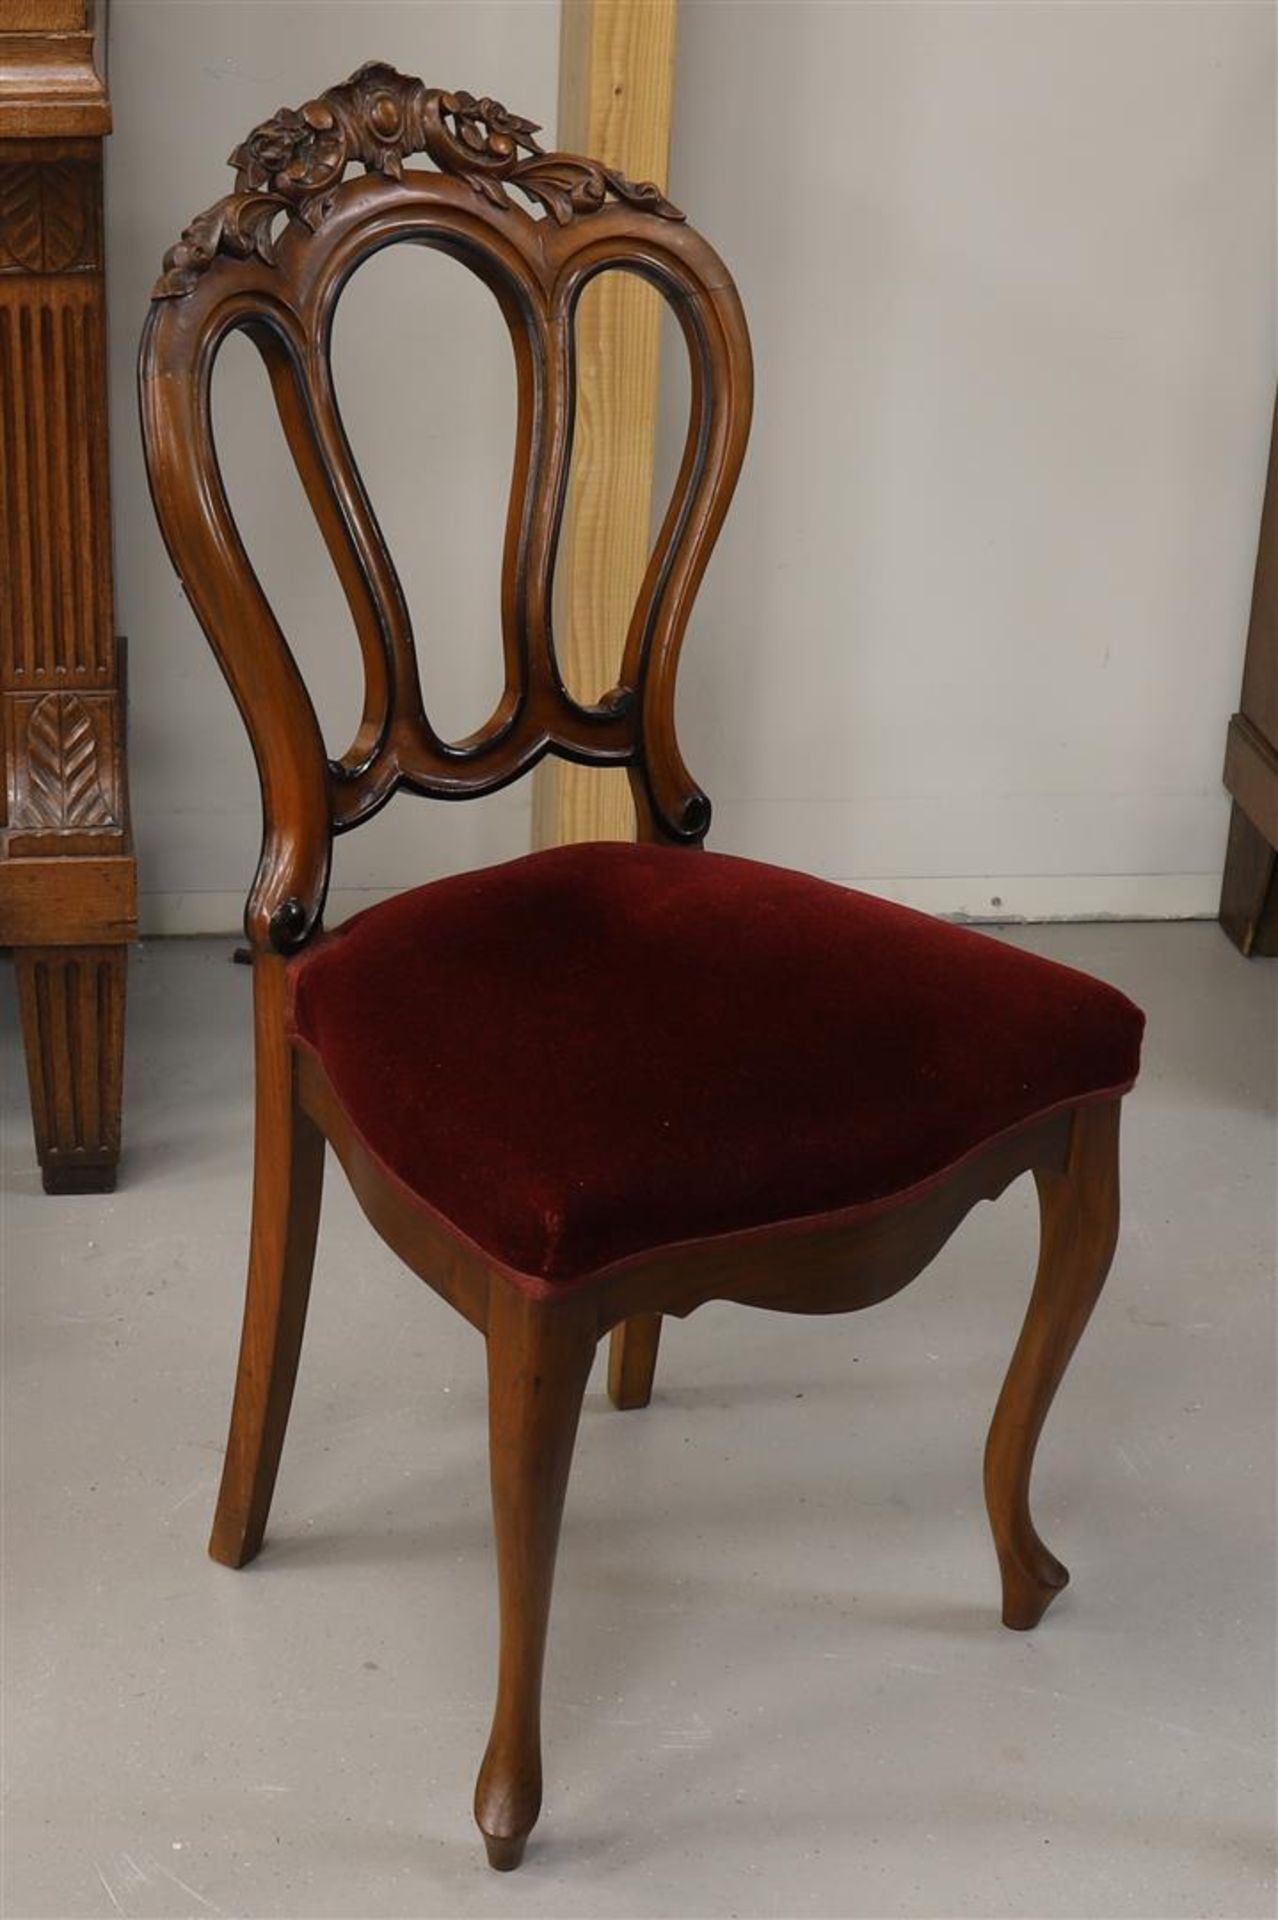 Seven mahogany dining room chairs with fabric upholstery, so-called 'Pretzel chairs', Dutch, - Image 4 of 4